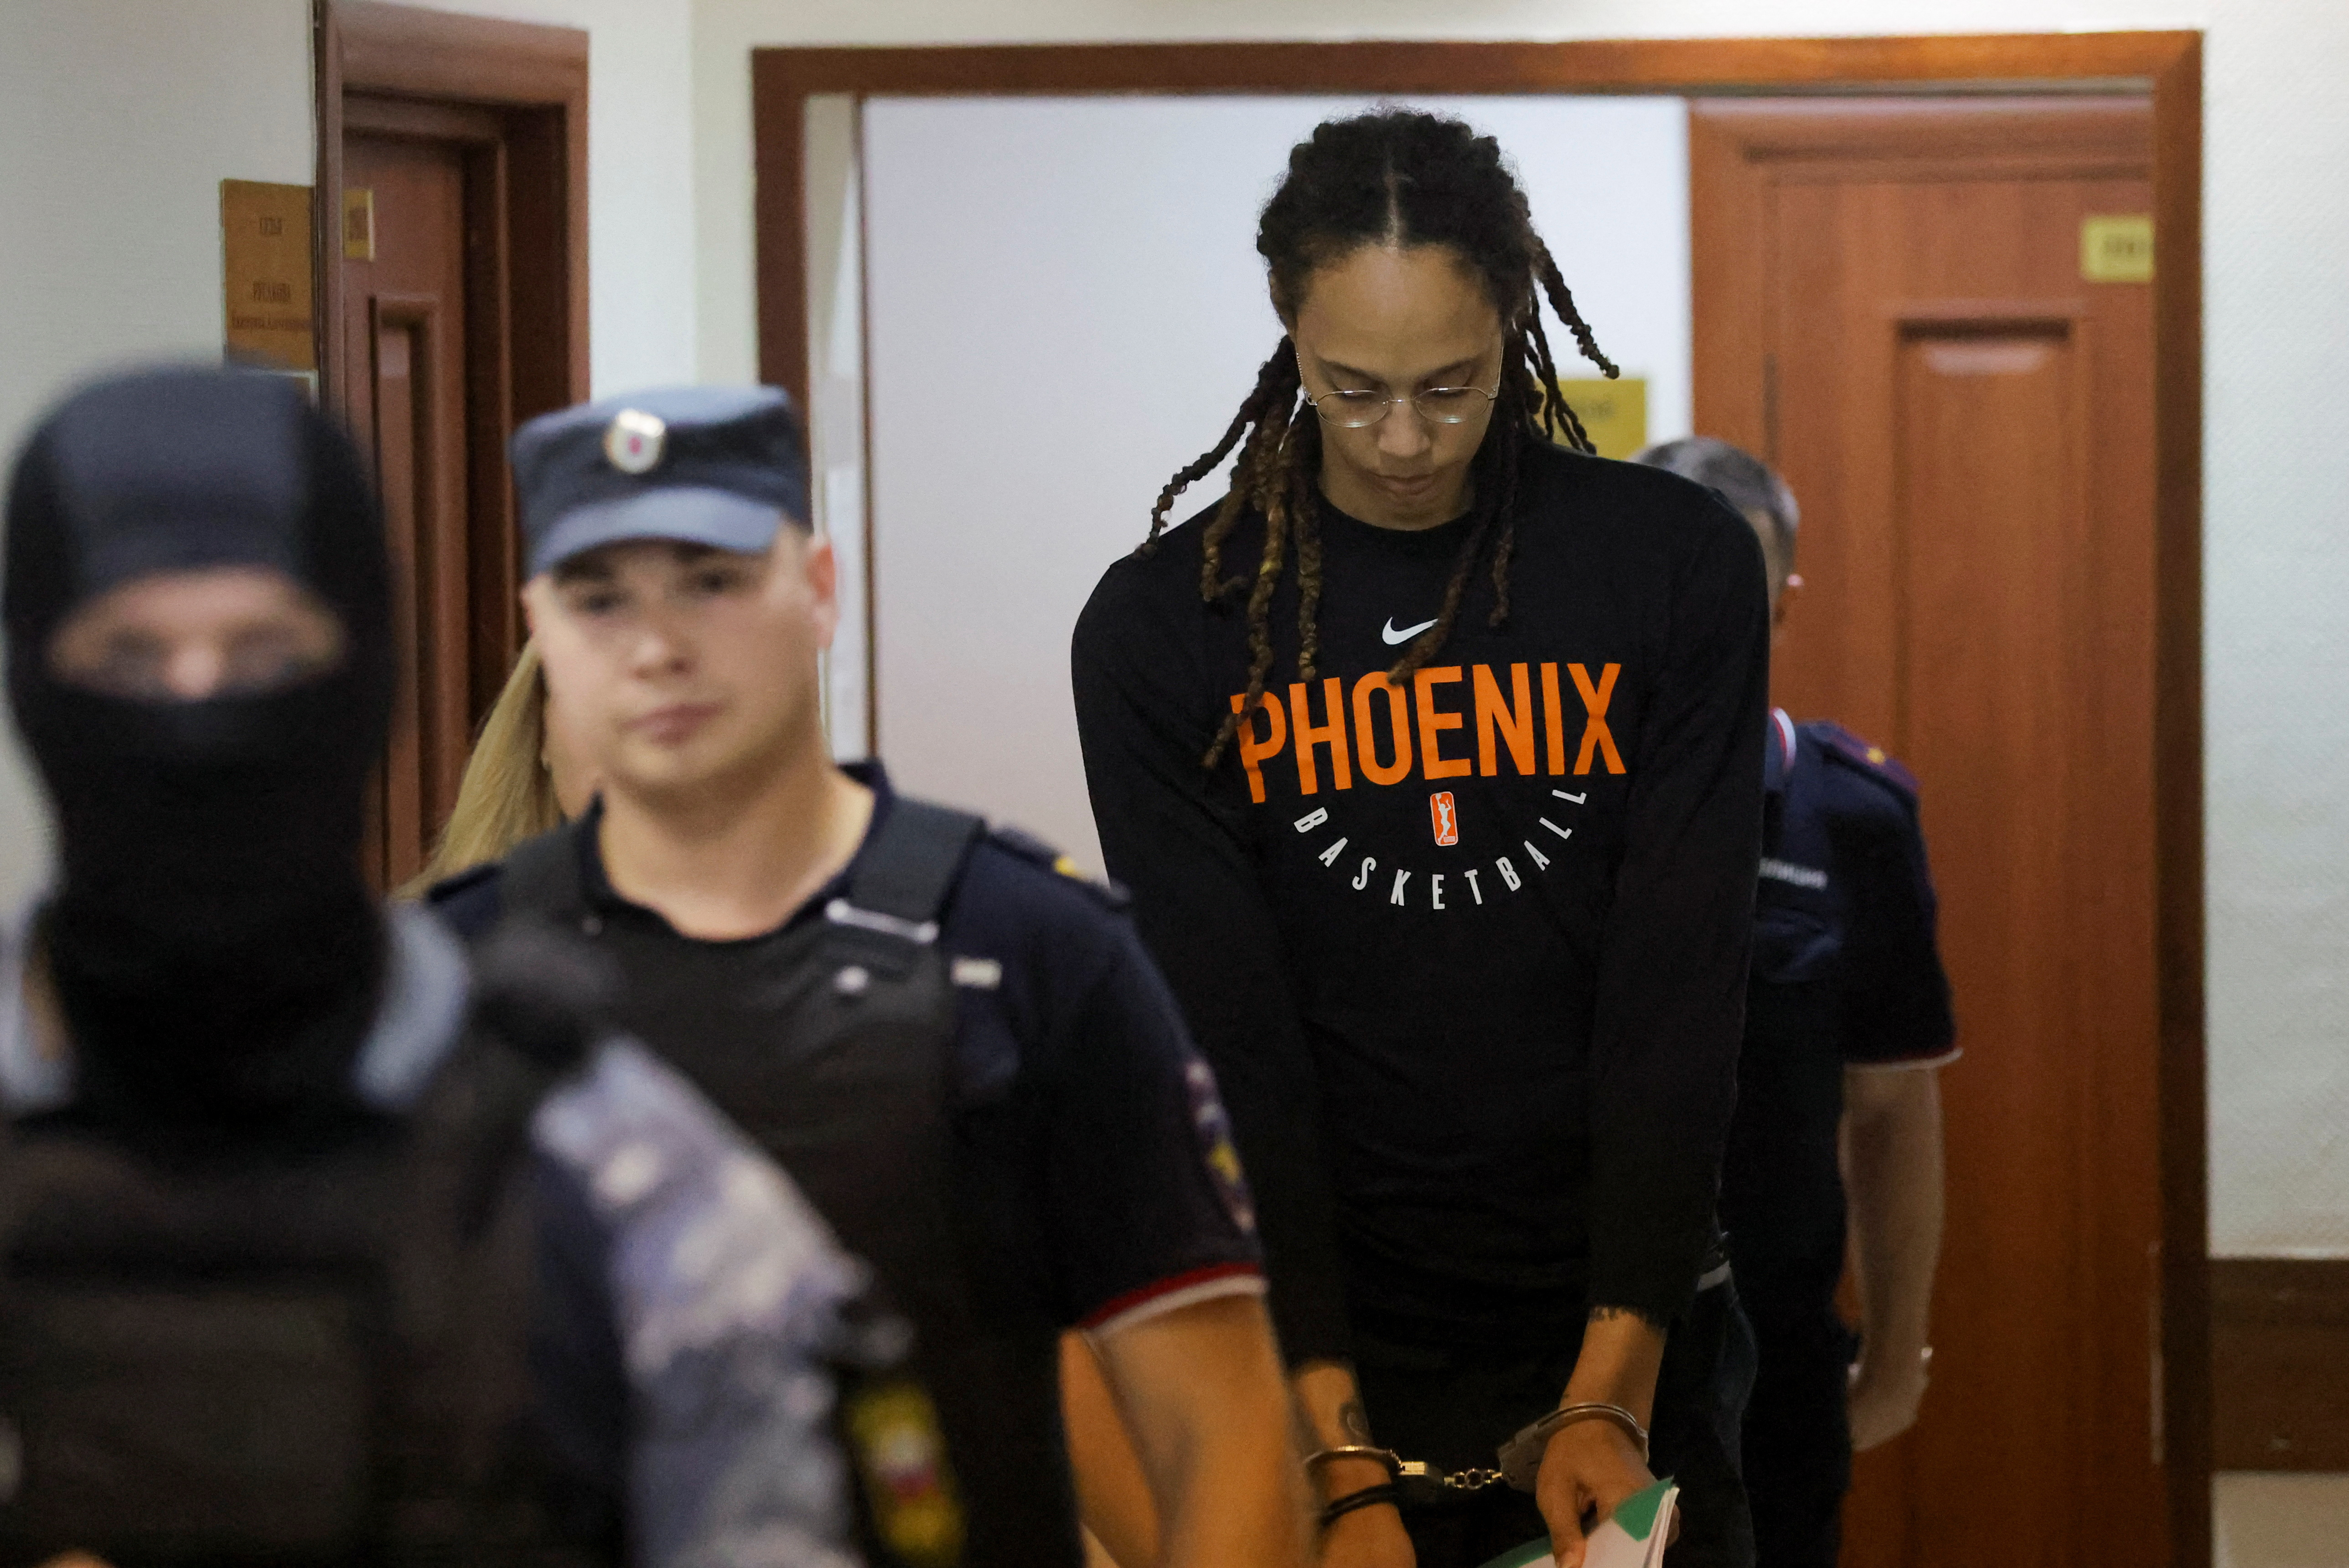 WNBA star Brittney Griner stands trial in Russia on drug charge